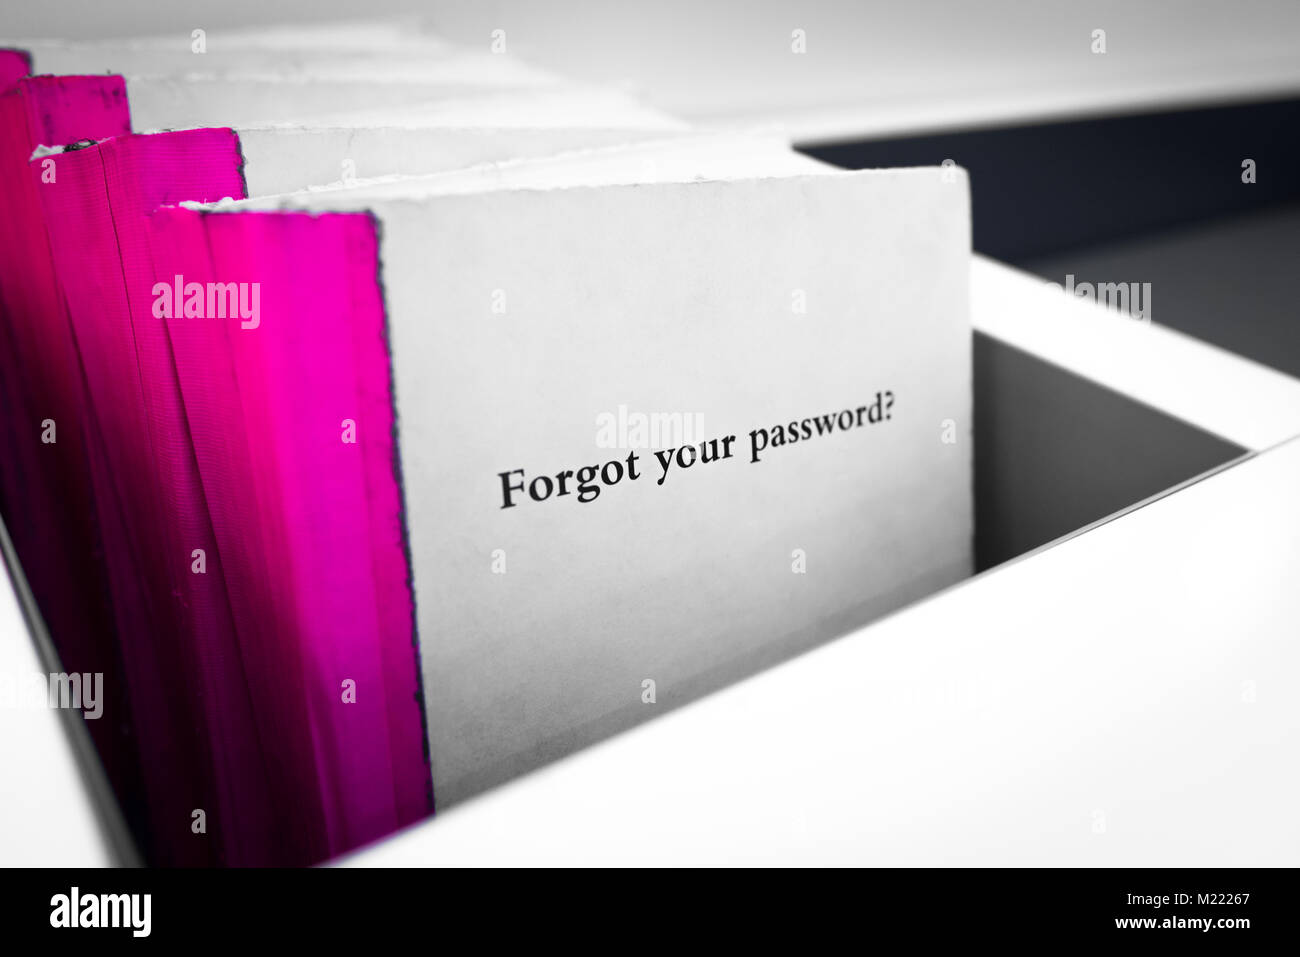 Forgot Password. White book with Forgot Your Password question on the cover. Technology concept Stock Photo